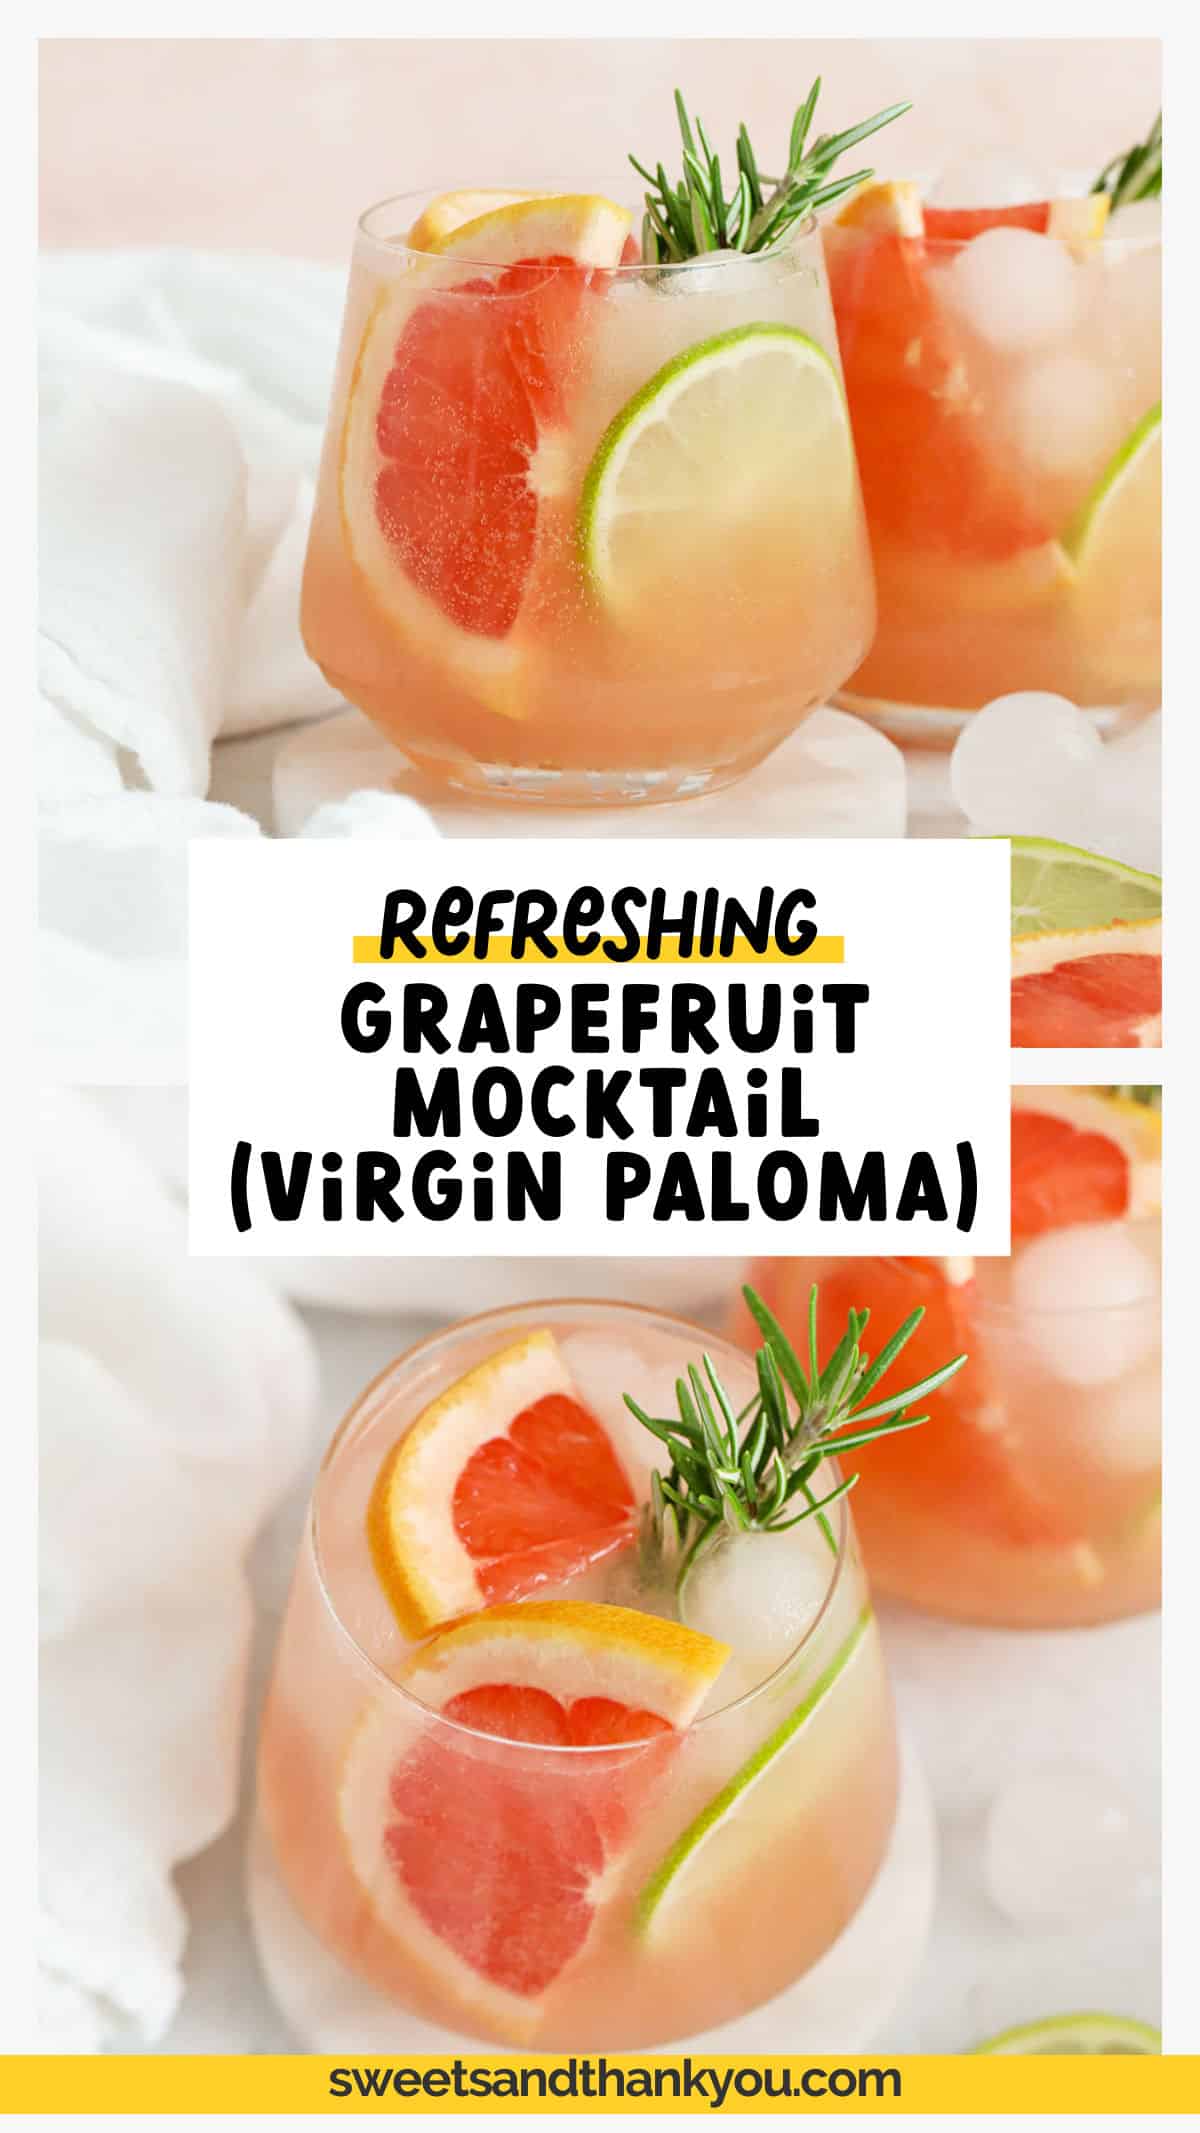 Let's make a Grapefruit Mocktail! This virgin paloma is the perfect blend of citrus & sparkle. You'll love the fresh flavor! A non-alcoholic paloma recipe like this makes a PERFECT holiday mocktail or party drink. Beyond the gorgeous pink color and light flavor, this easy mocktail recipe is EASY to make and looks elegant and sophisticated without a lot of fuss. (One secret: the rosemary simple syrup!) Get this mocktail recipe and our favorite garnishes at Sweets & Thank You